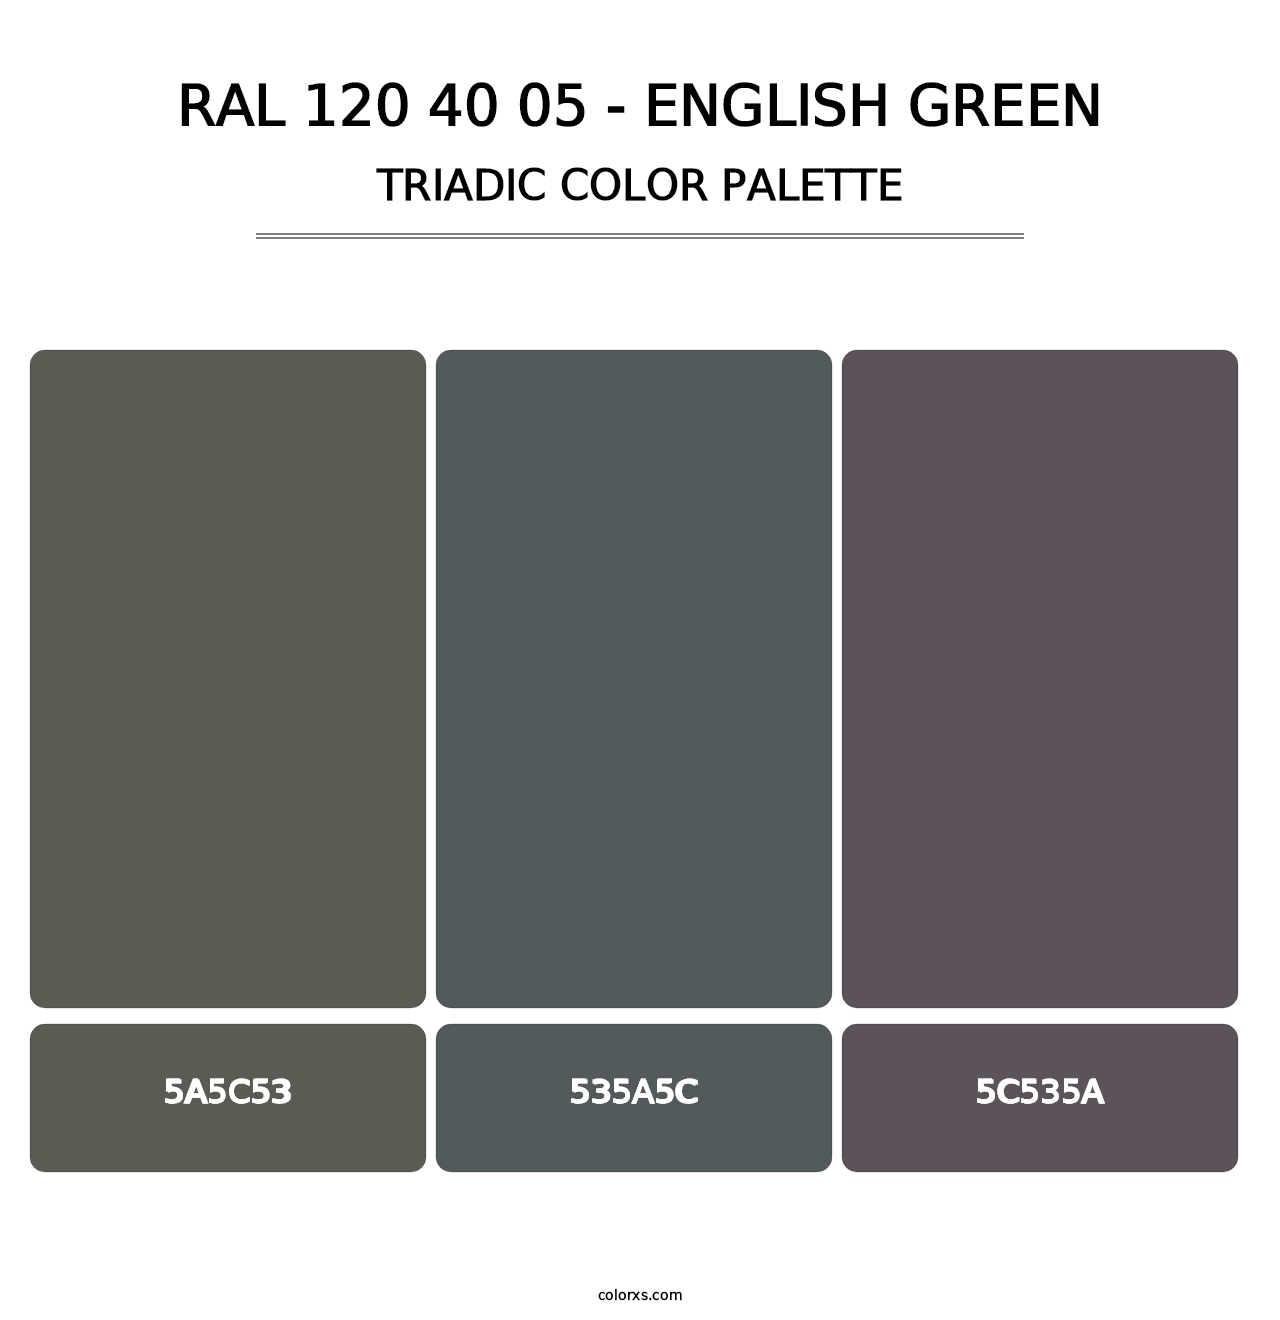 RAL 120 40 05 - English Green - Triadic Color Palette